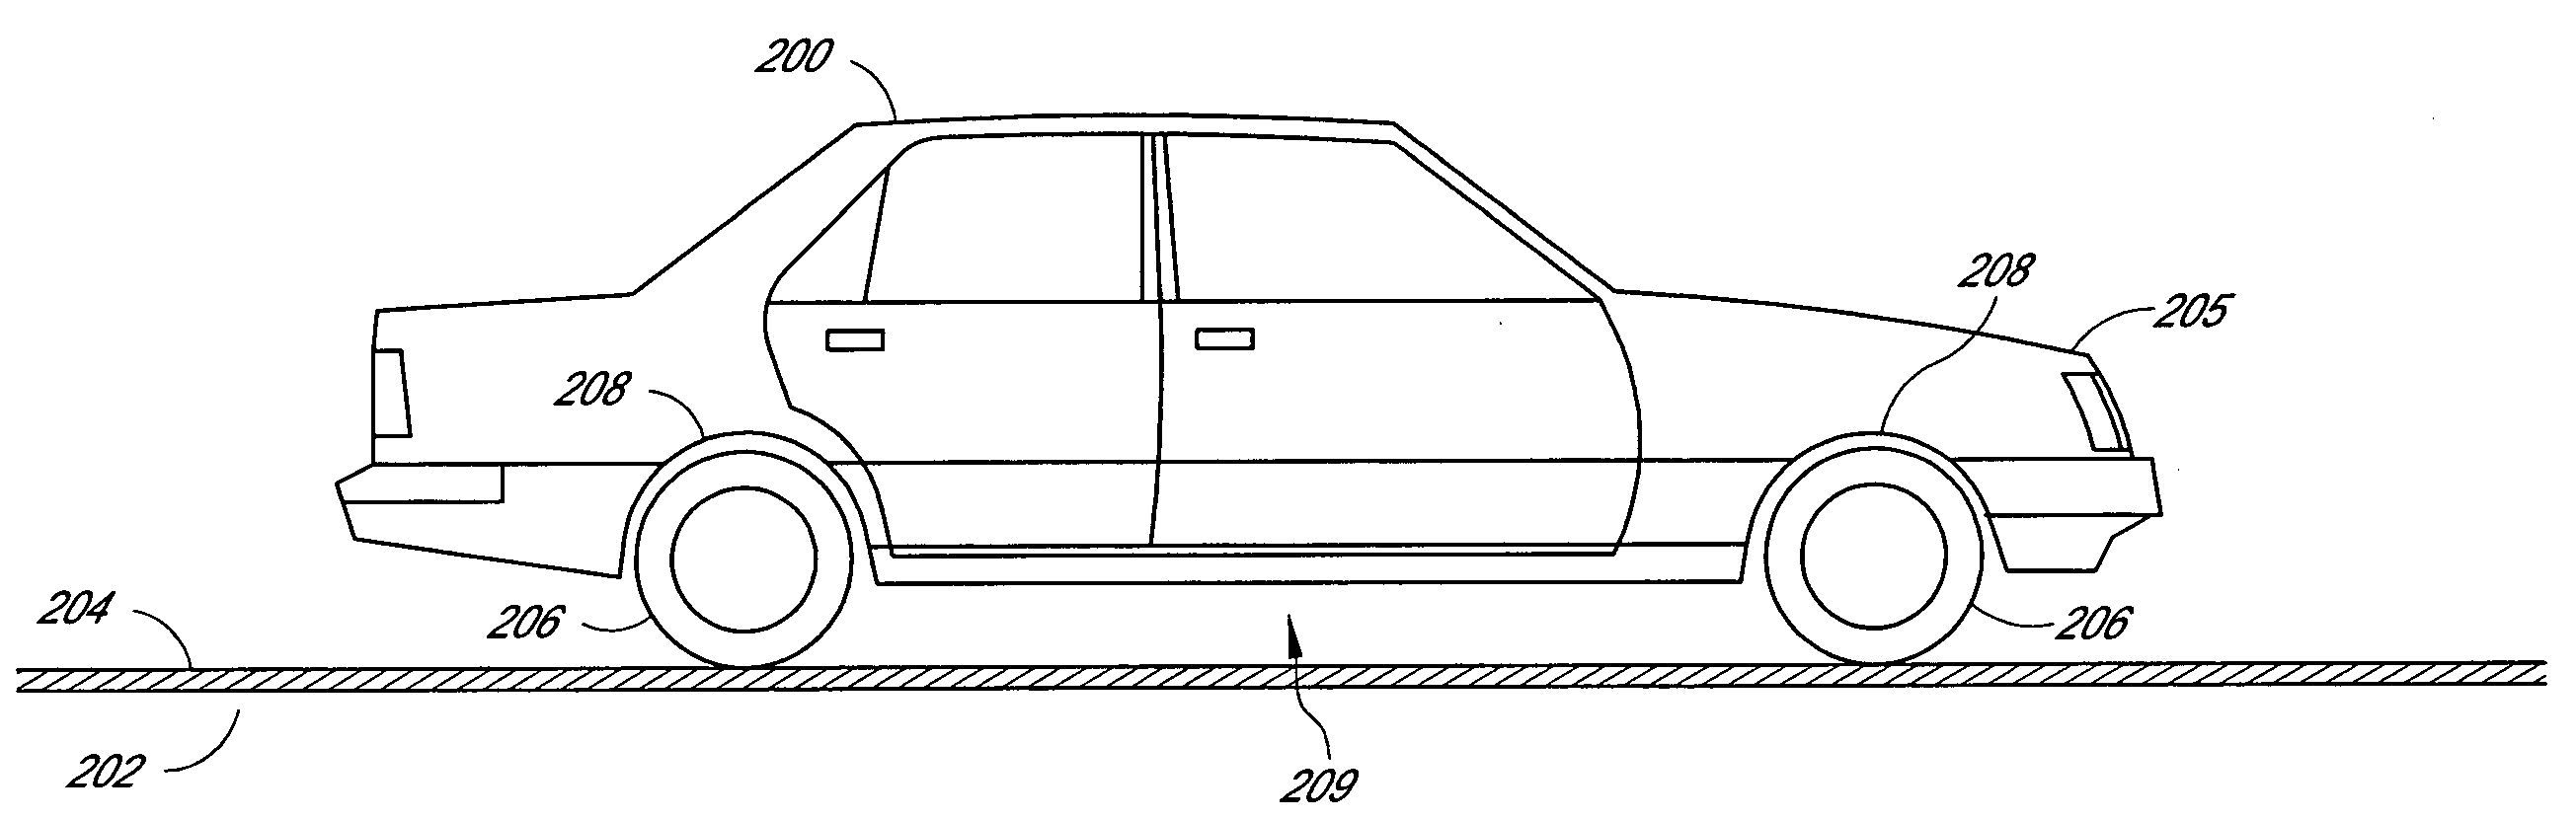 System and method for removing pollutants from a roadway